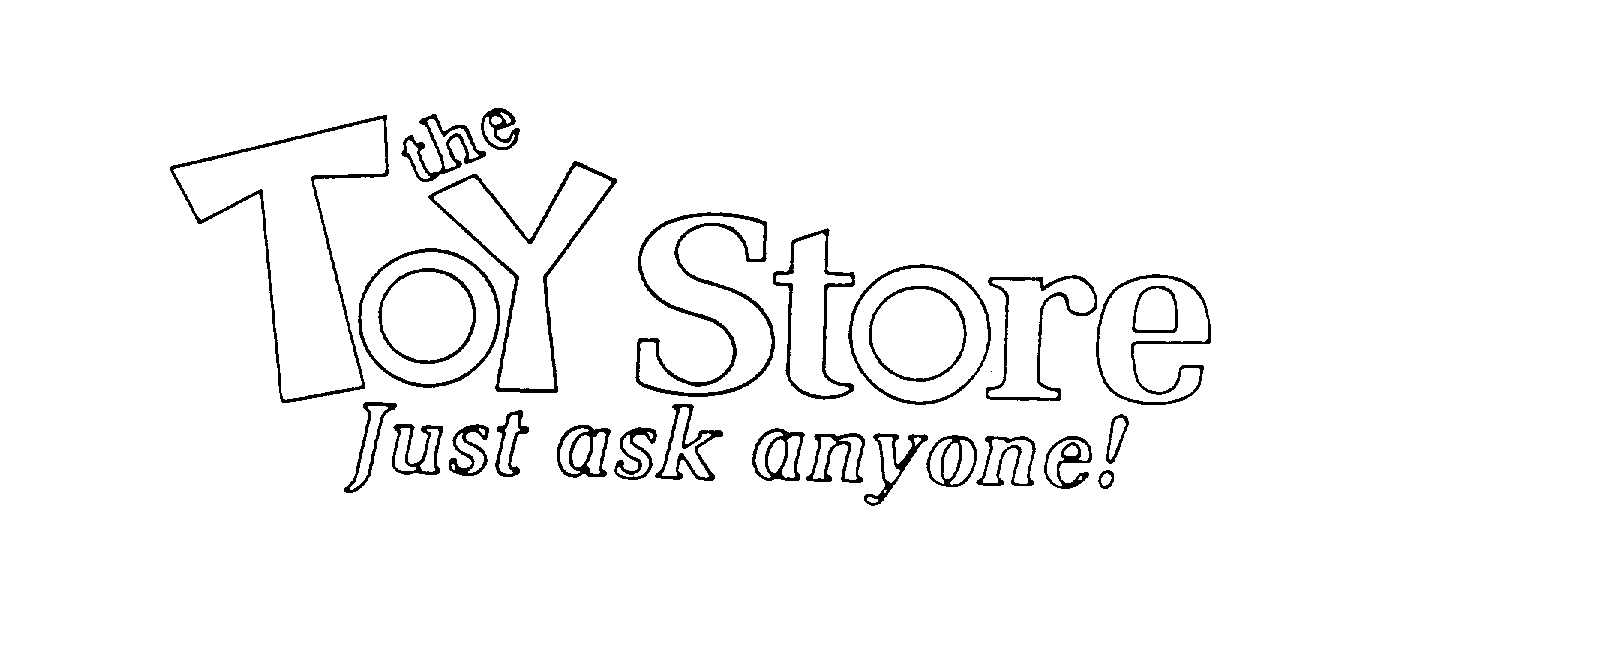 THE TOY STORE JUST ASK ANYONE!